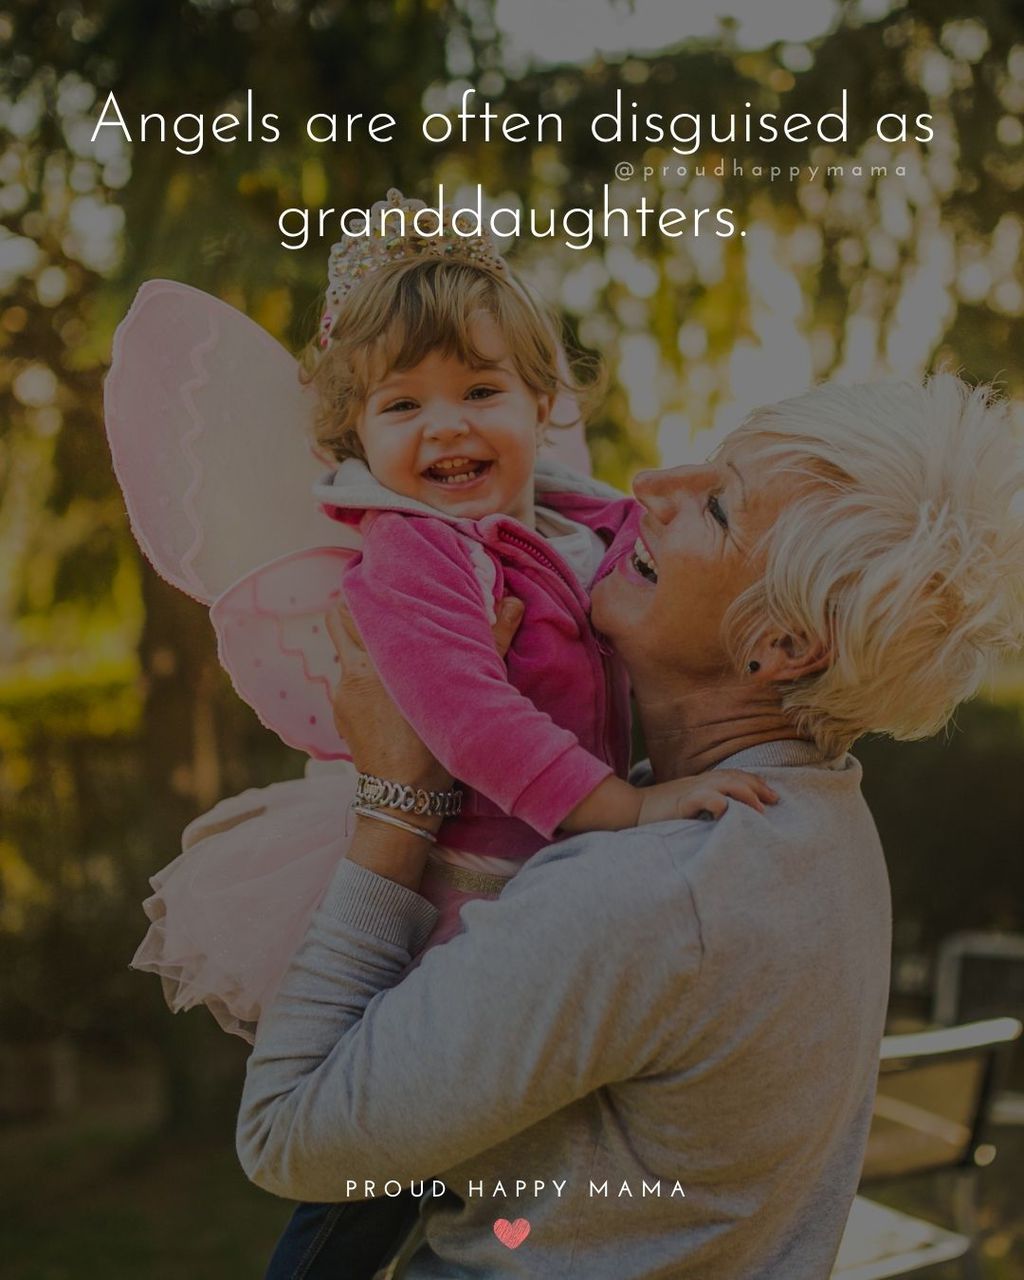 Grandmother holding young granddaughter in fairy outfit, with text overlay, ‘Angels are often disguised as granddaughters.’